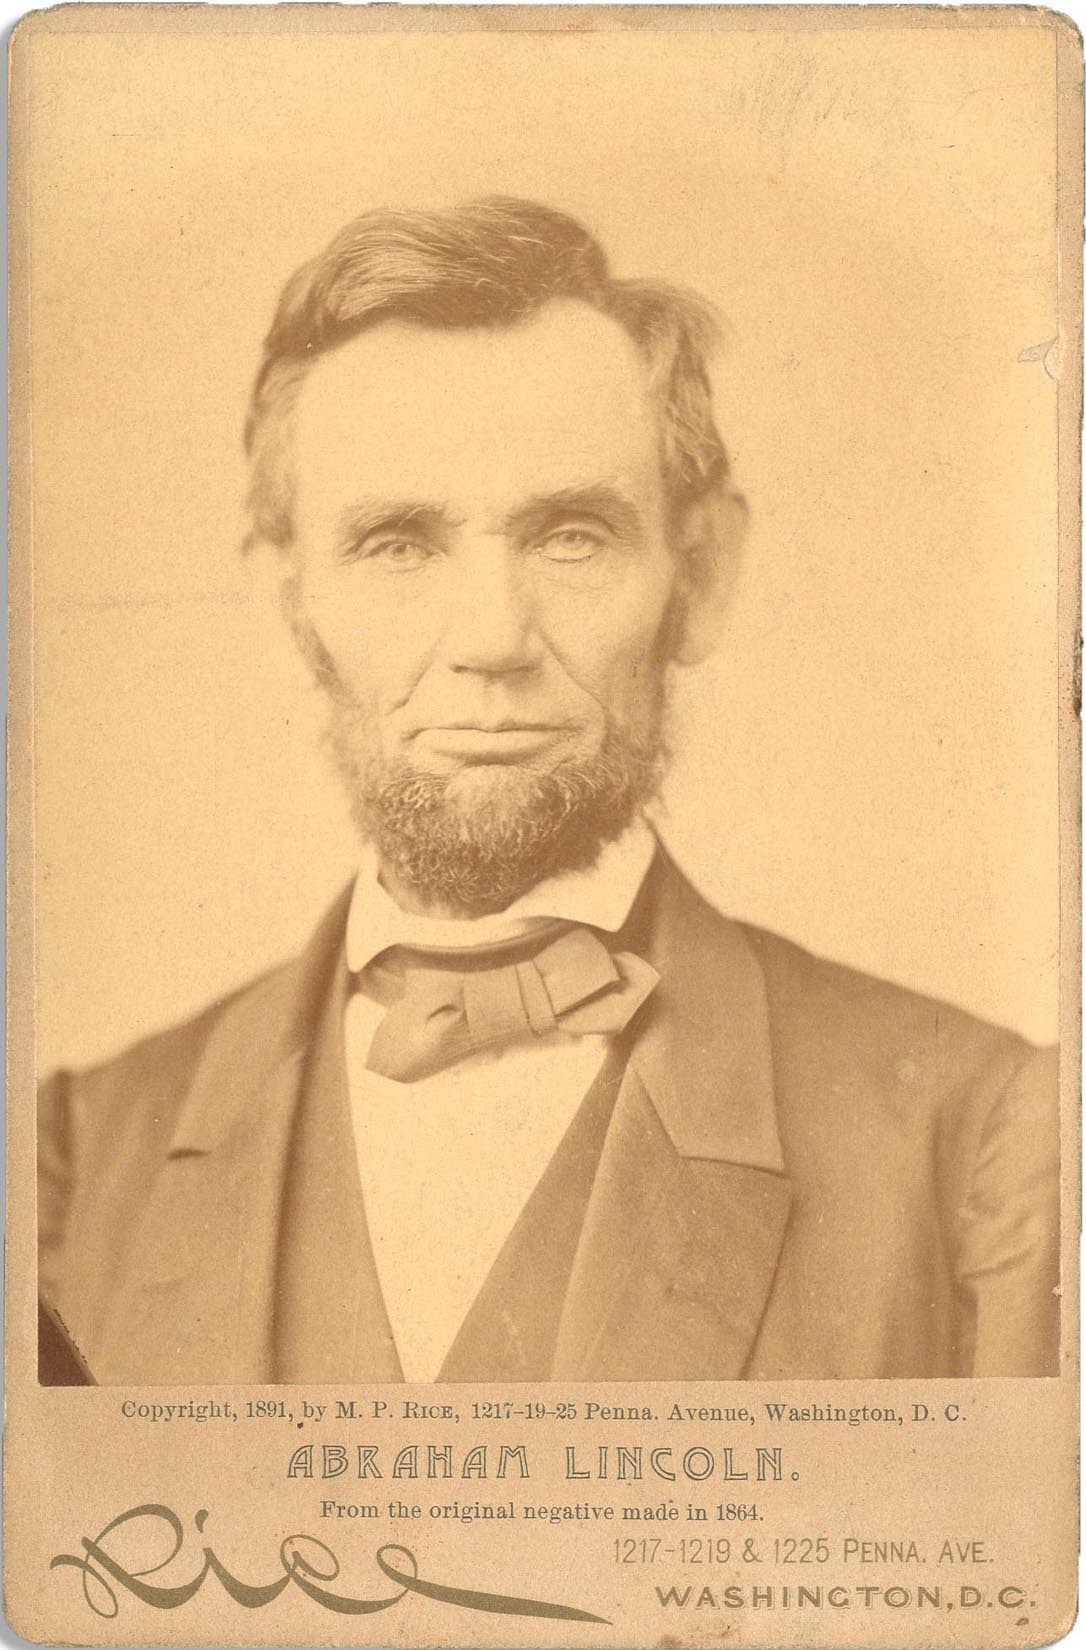 Rock And Pop Culture - 1891 Abraham Lincoln Cabinet Card by M.P. Rice